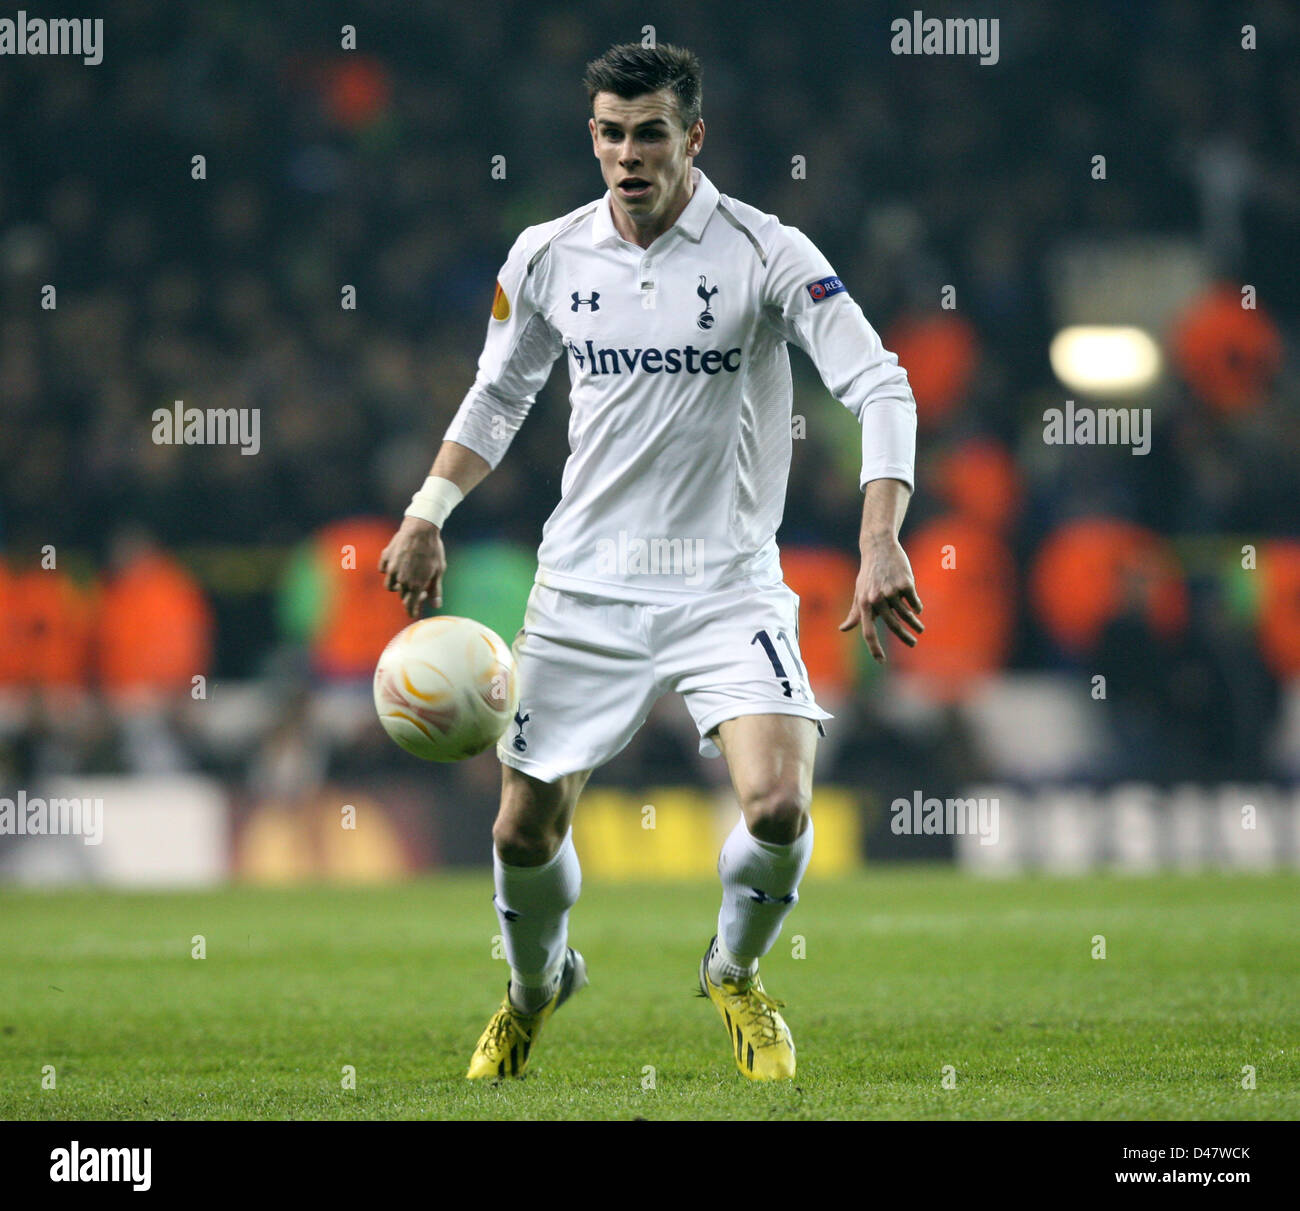 07.03.2013 London, England. Gareth Bale of Tottenham Hotspur during the Europa League game between Tottenham Hotspur and Inter Milan from White Hart Lane. Tottenham won the first leg tie by a score of 3-0. Stock Photo